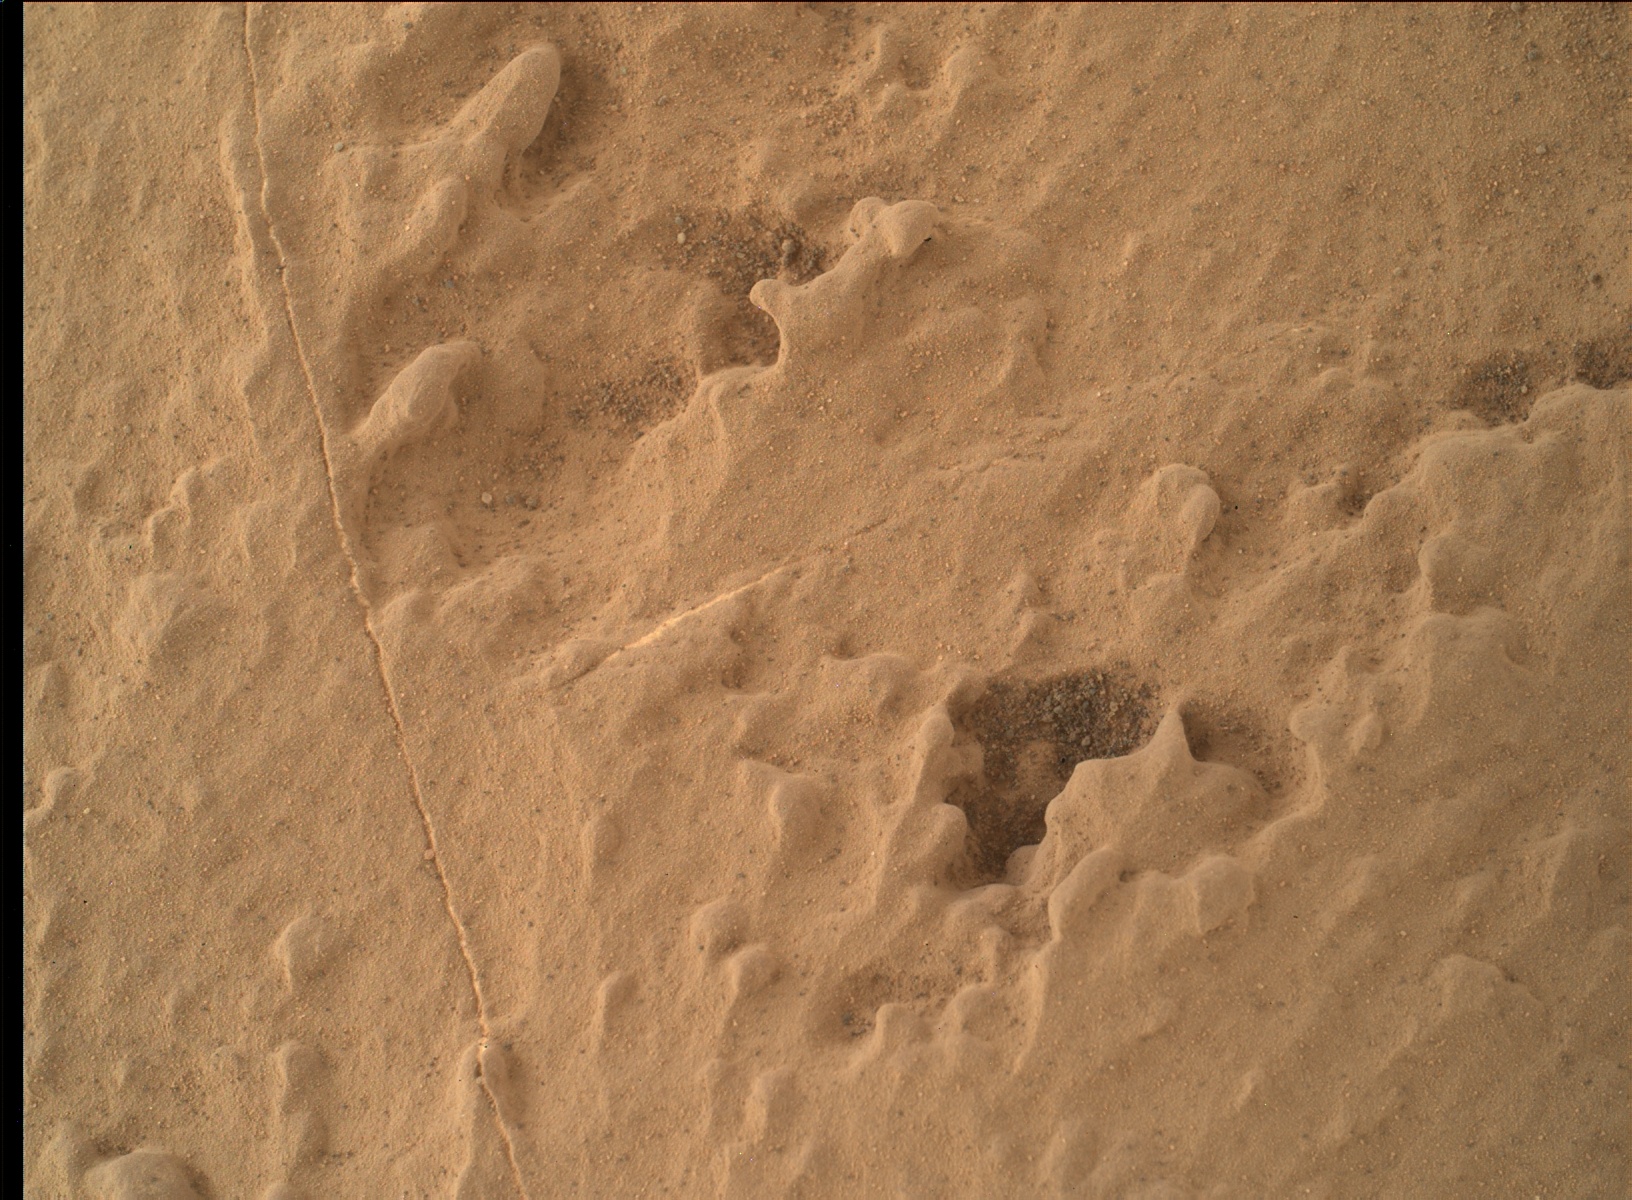 Nasa's Mars rover Curiosity acquired this image using its Mars Hand Lens Imager (MAHLI) on Sol 1868